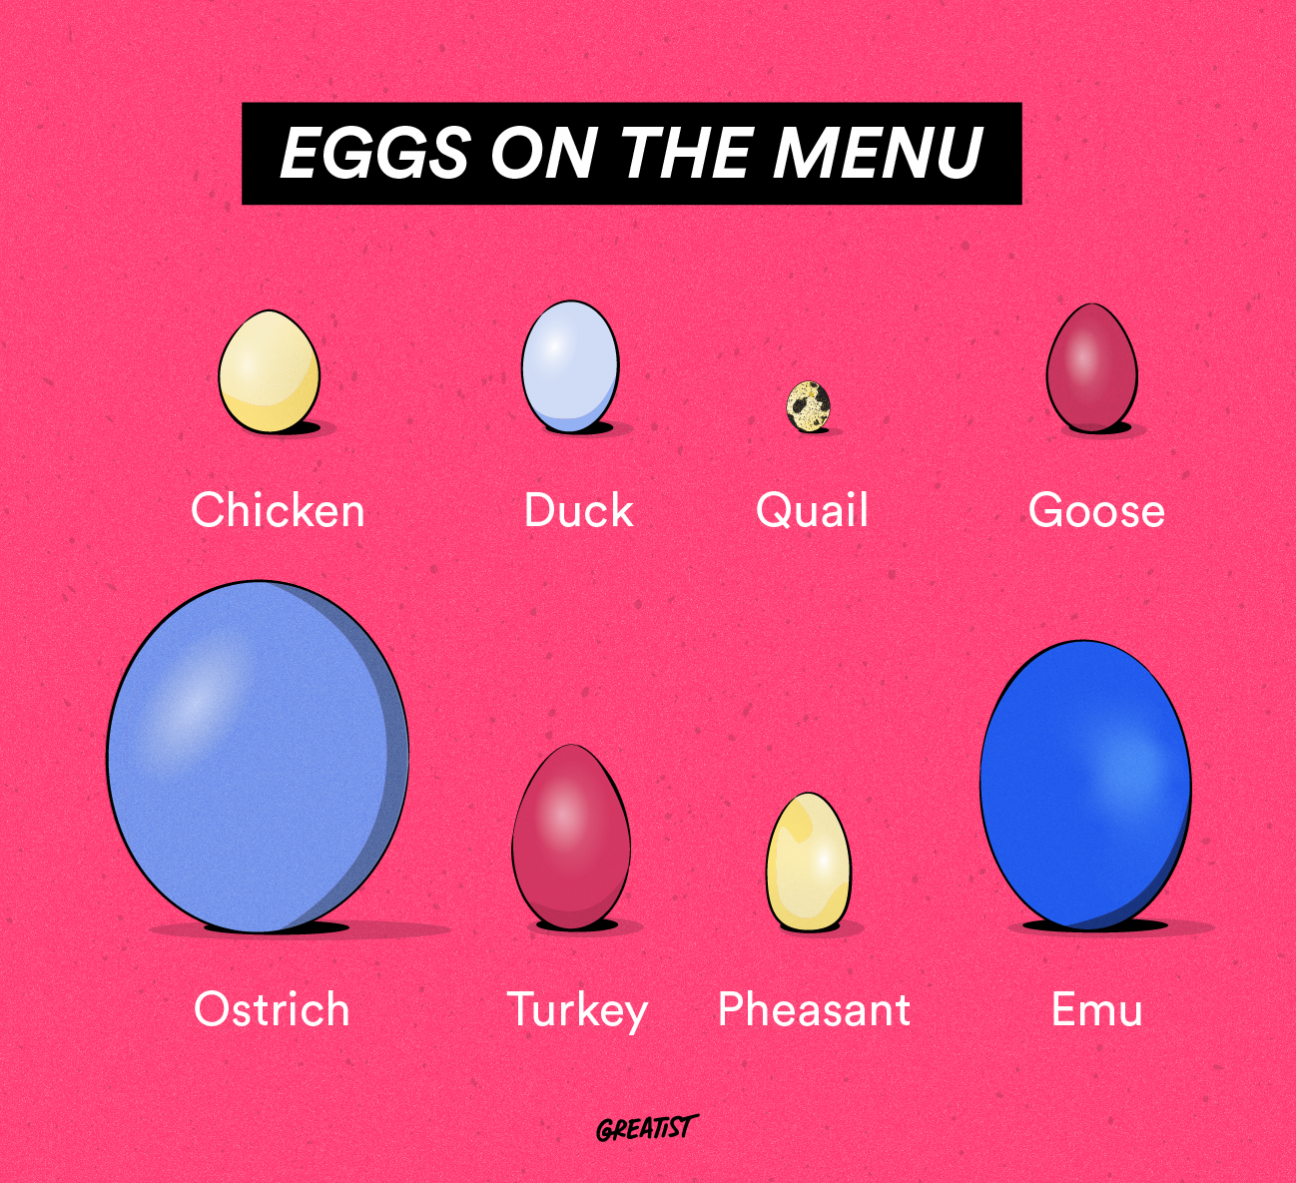 eggs on the menu infographic showing the sizes of different edible avian eggs